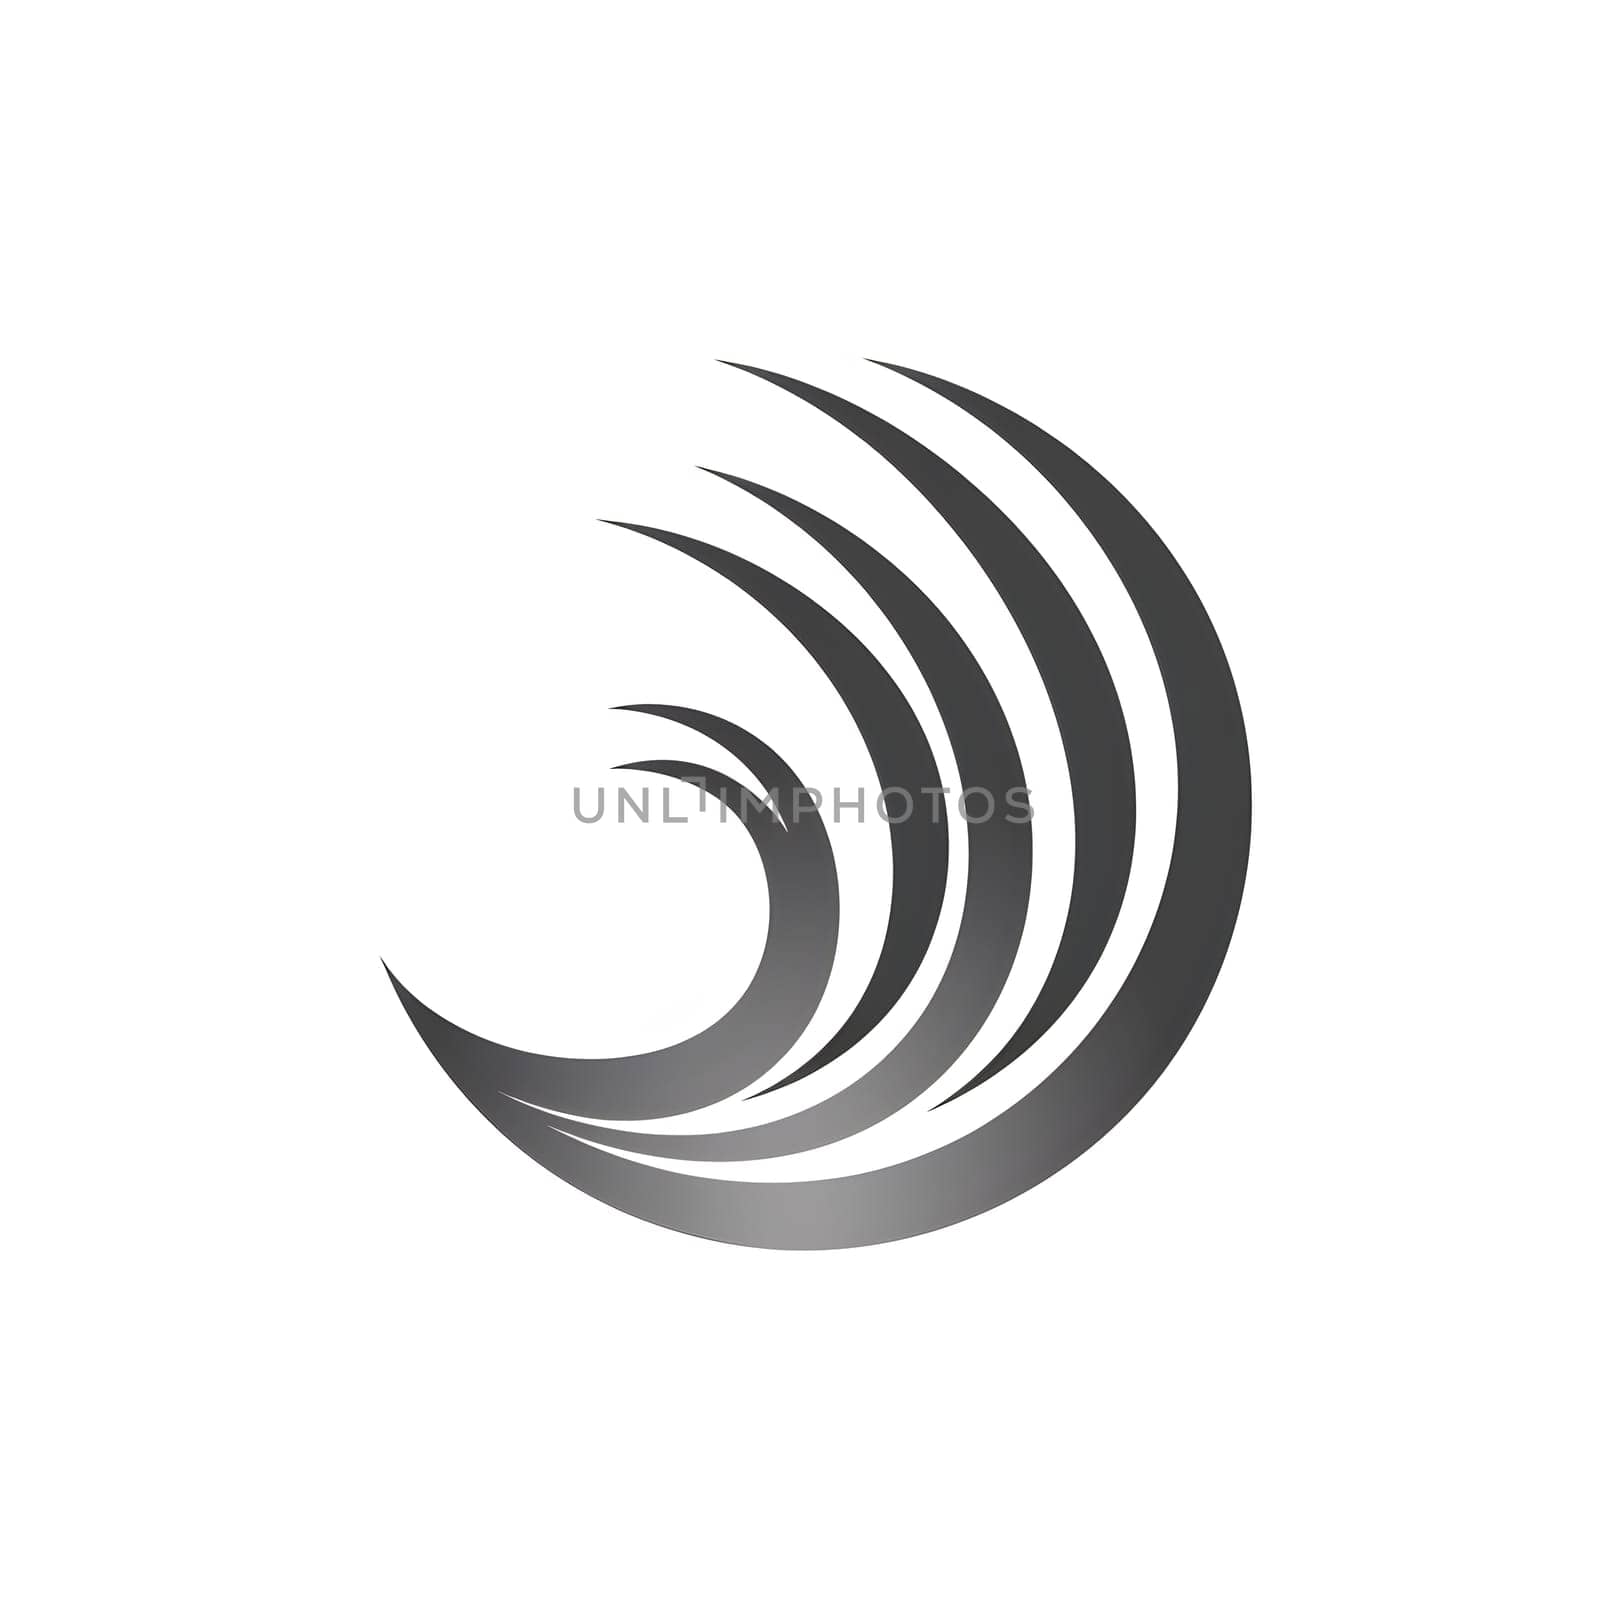 A black and white logo featuring a wave symbol in a minimalist art style. The design is clean and sleek, perfect for monochrome photography or graphic projects